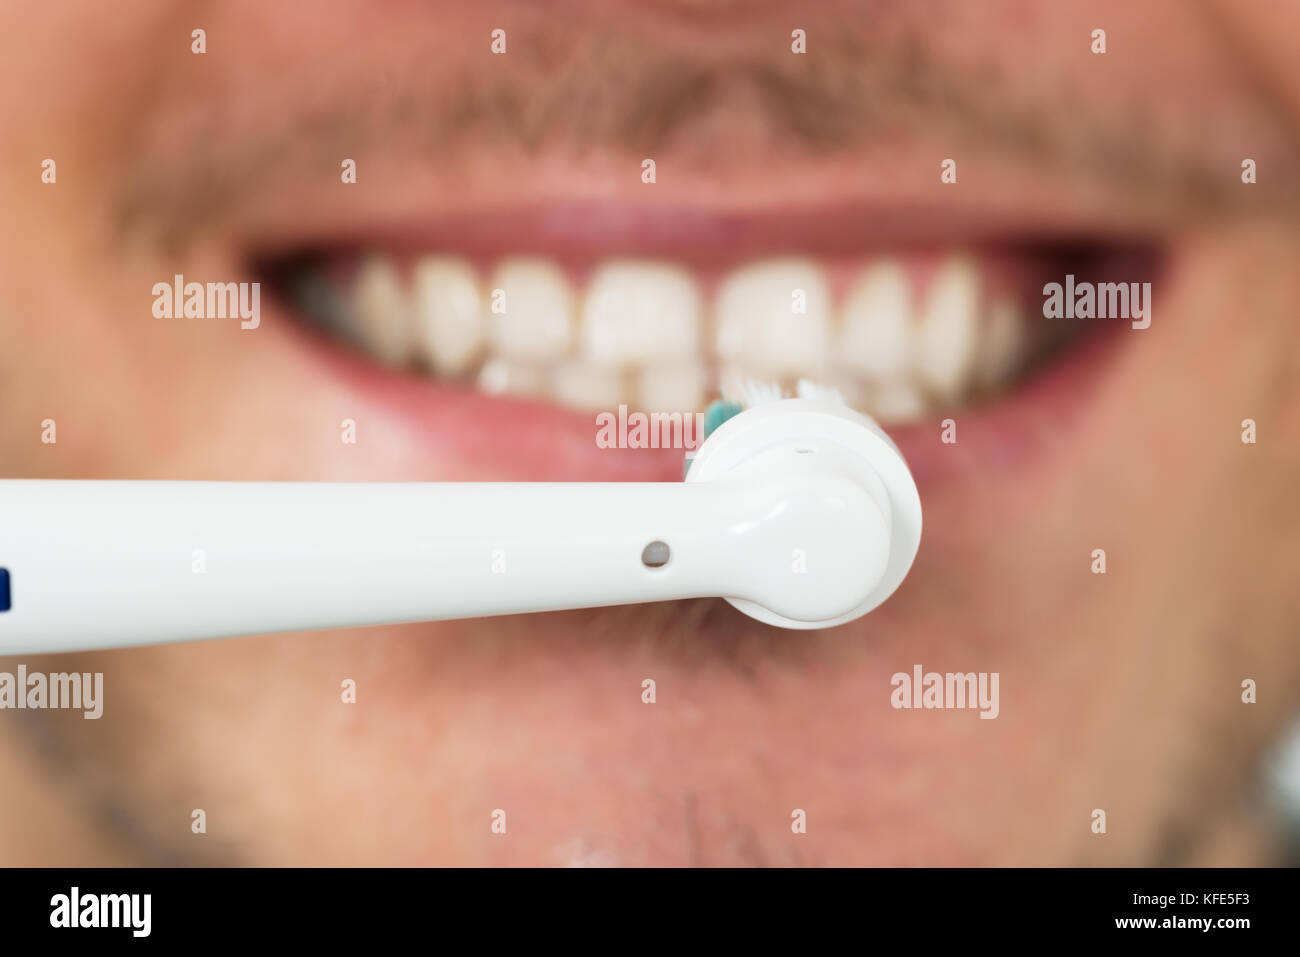 Close-up Of Young Man Teeth With Electric Toothbrush Stock Photo